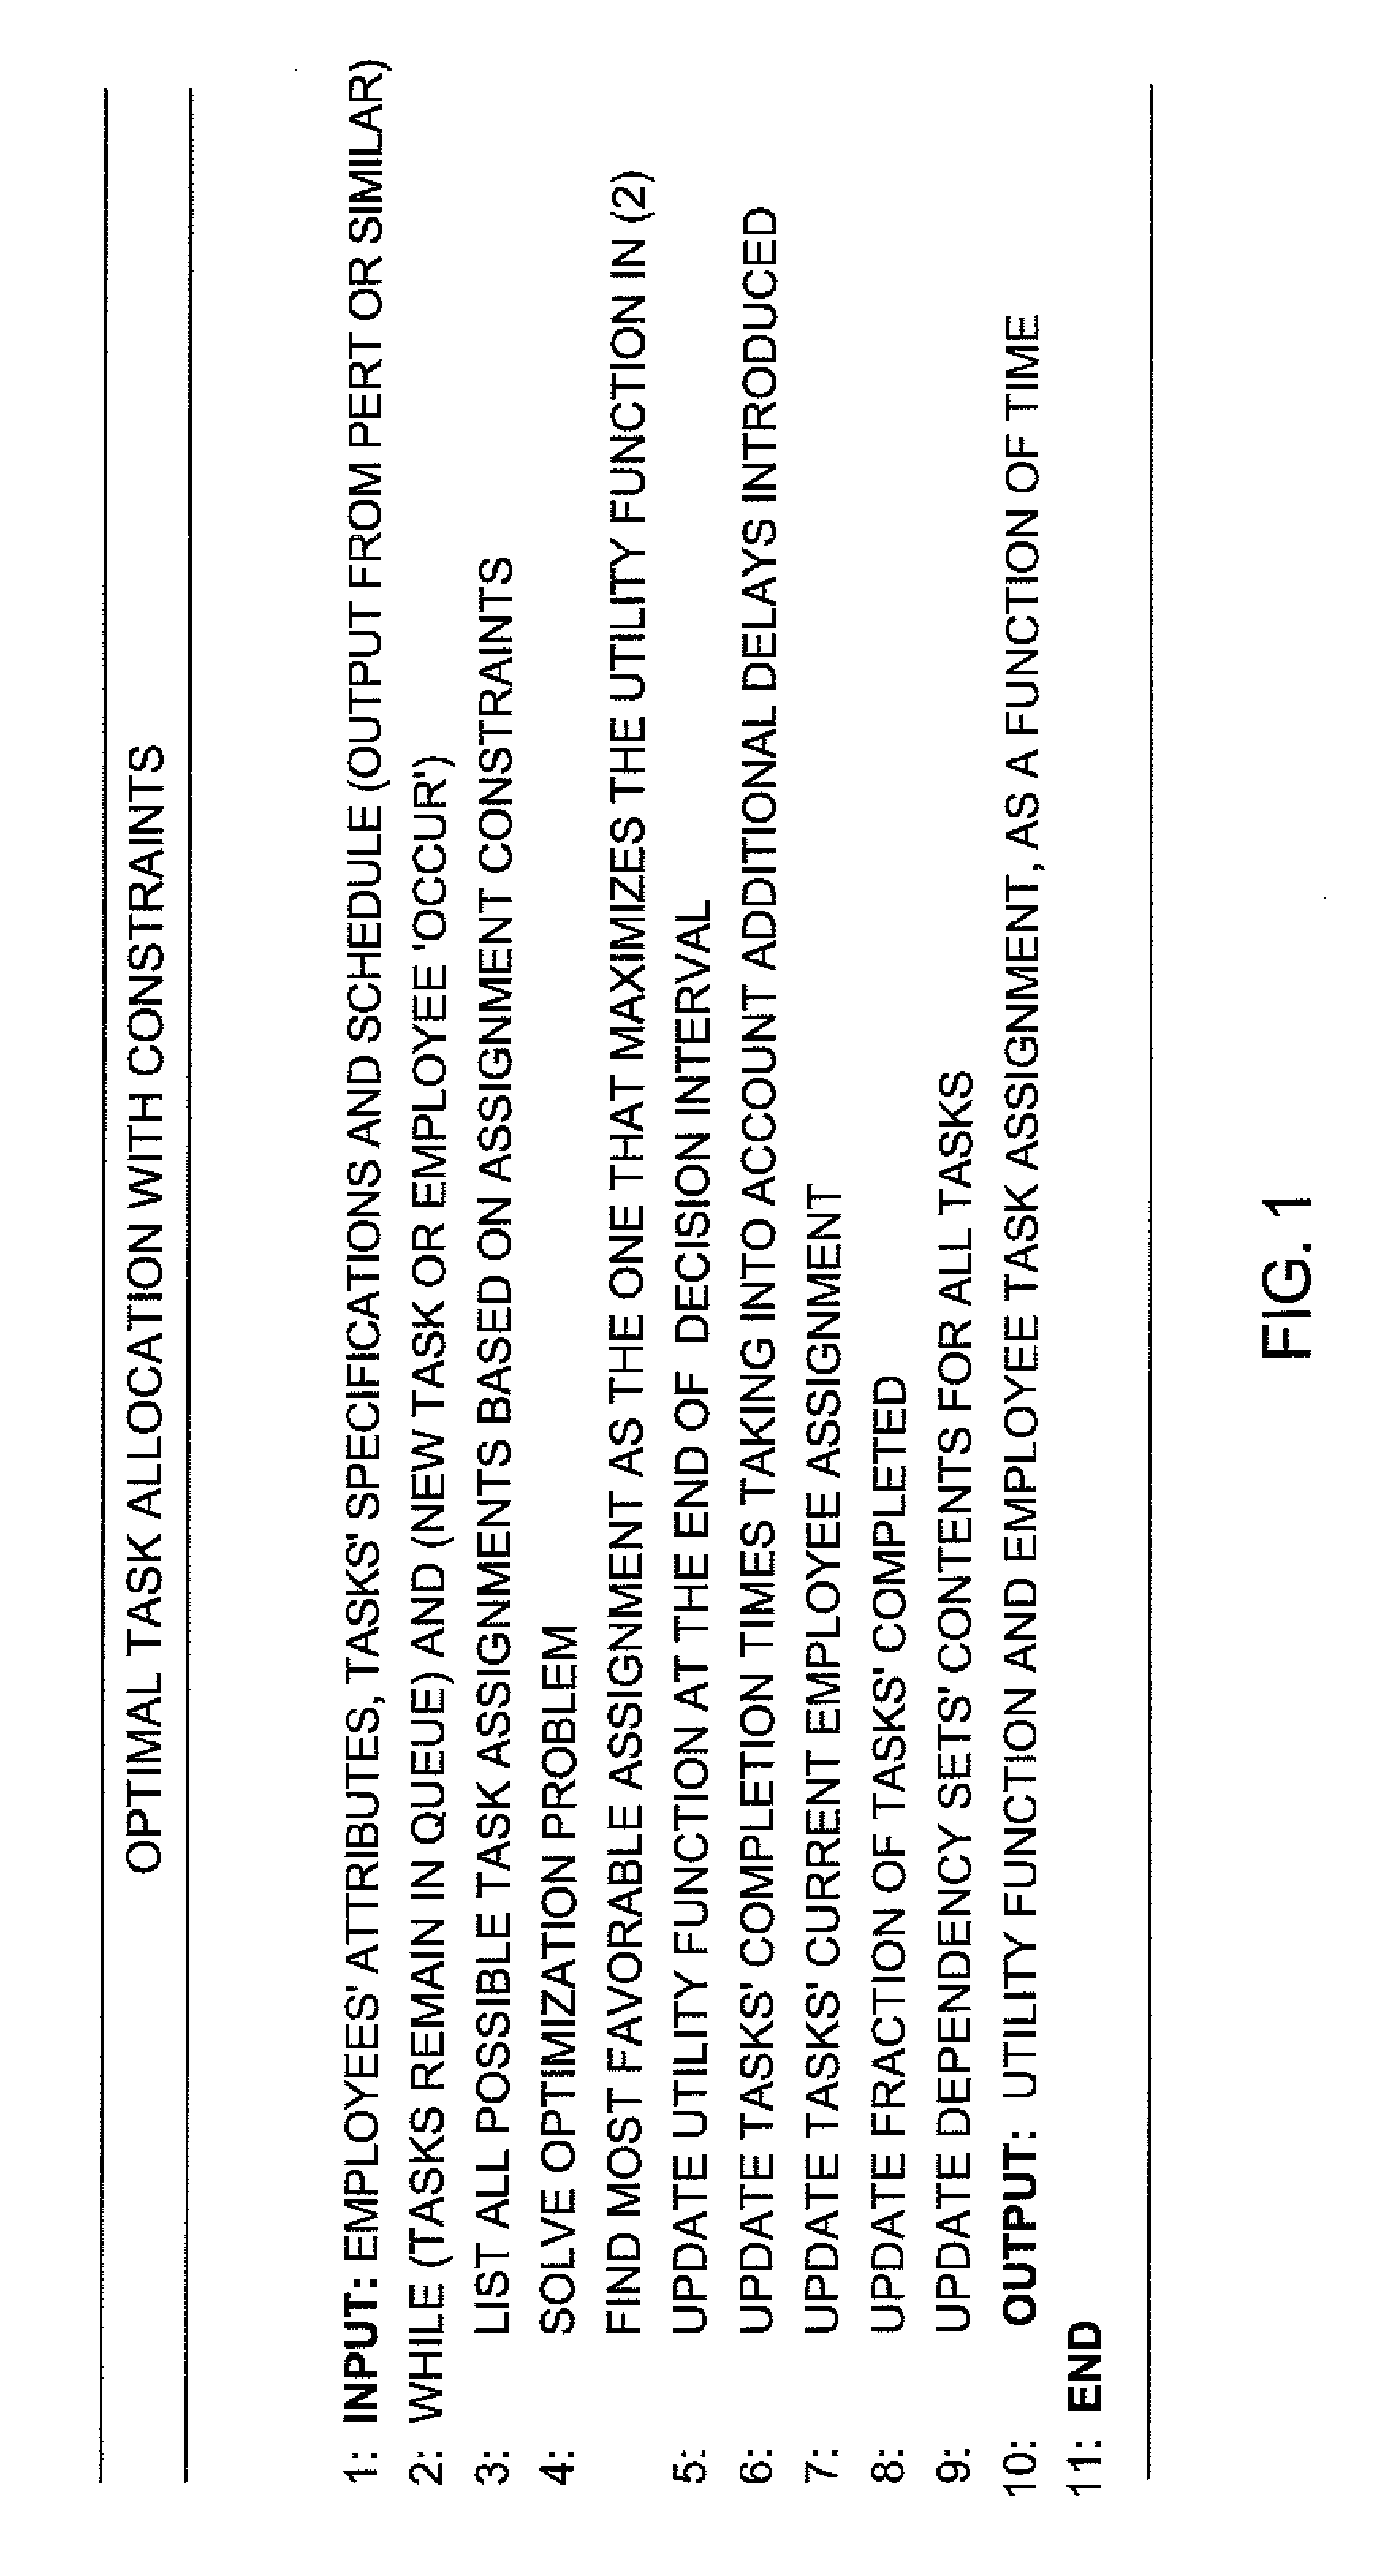 Method and system for allocating dependent tasks to teams through multi-variate optimization